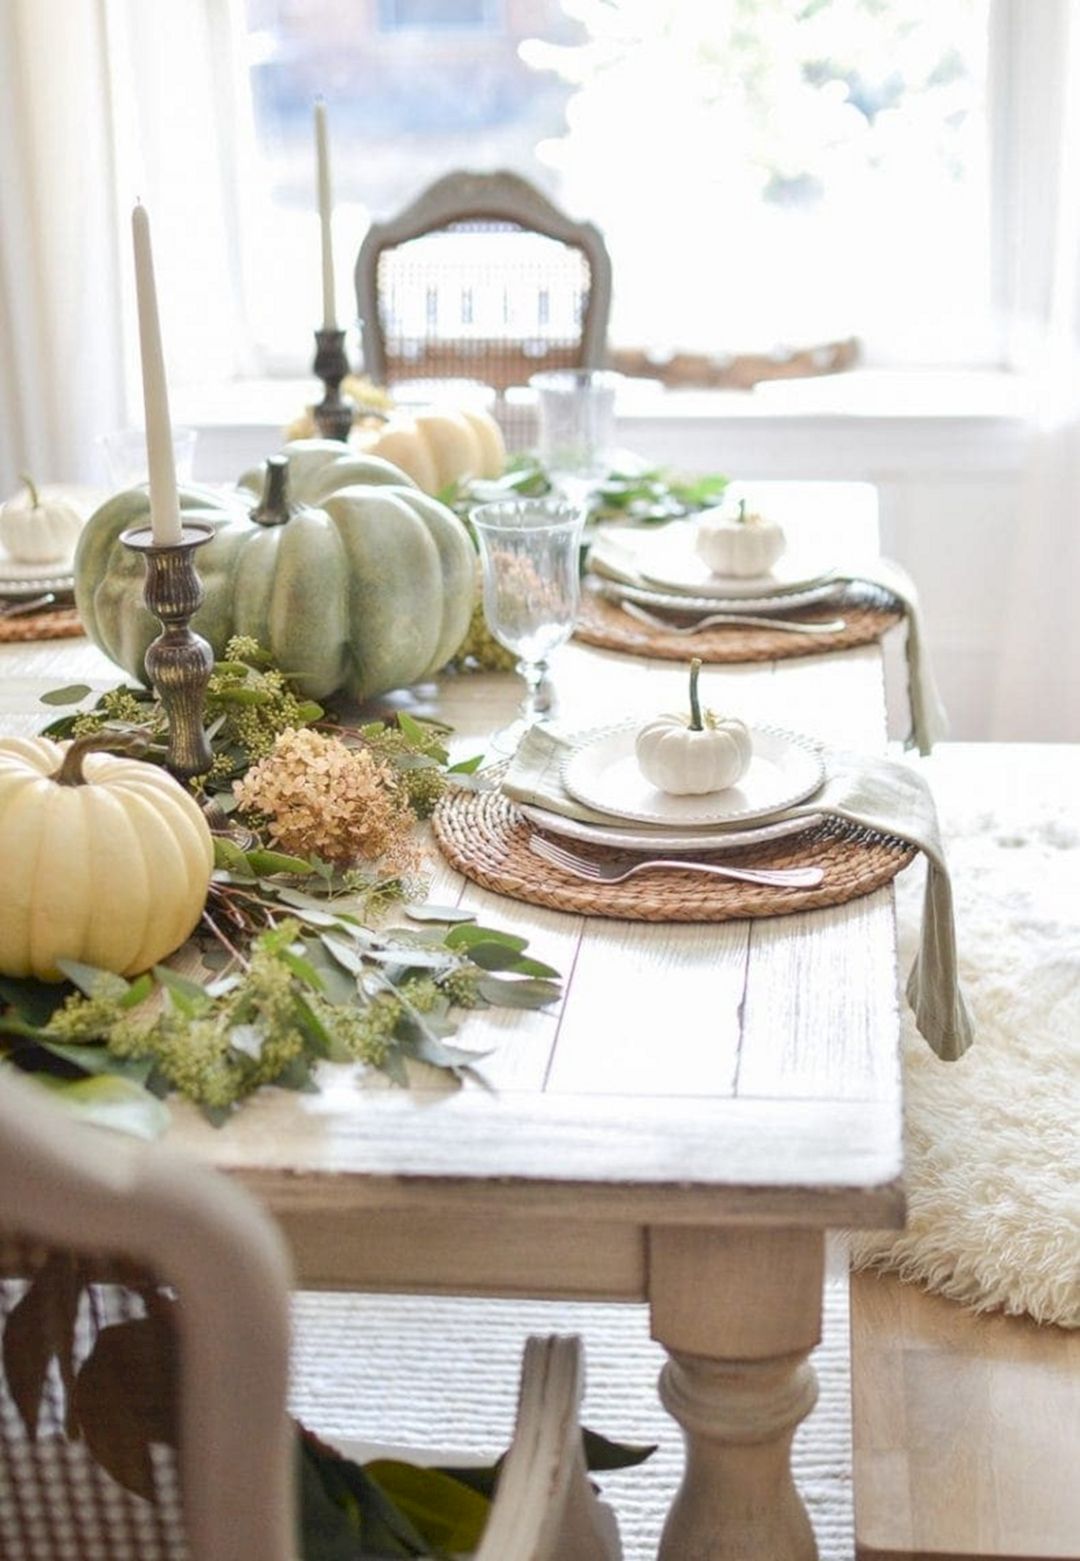 Thanksgiving And Fall Inspired Decorating From Joyfullygrowingblog